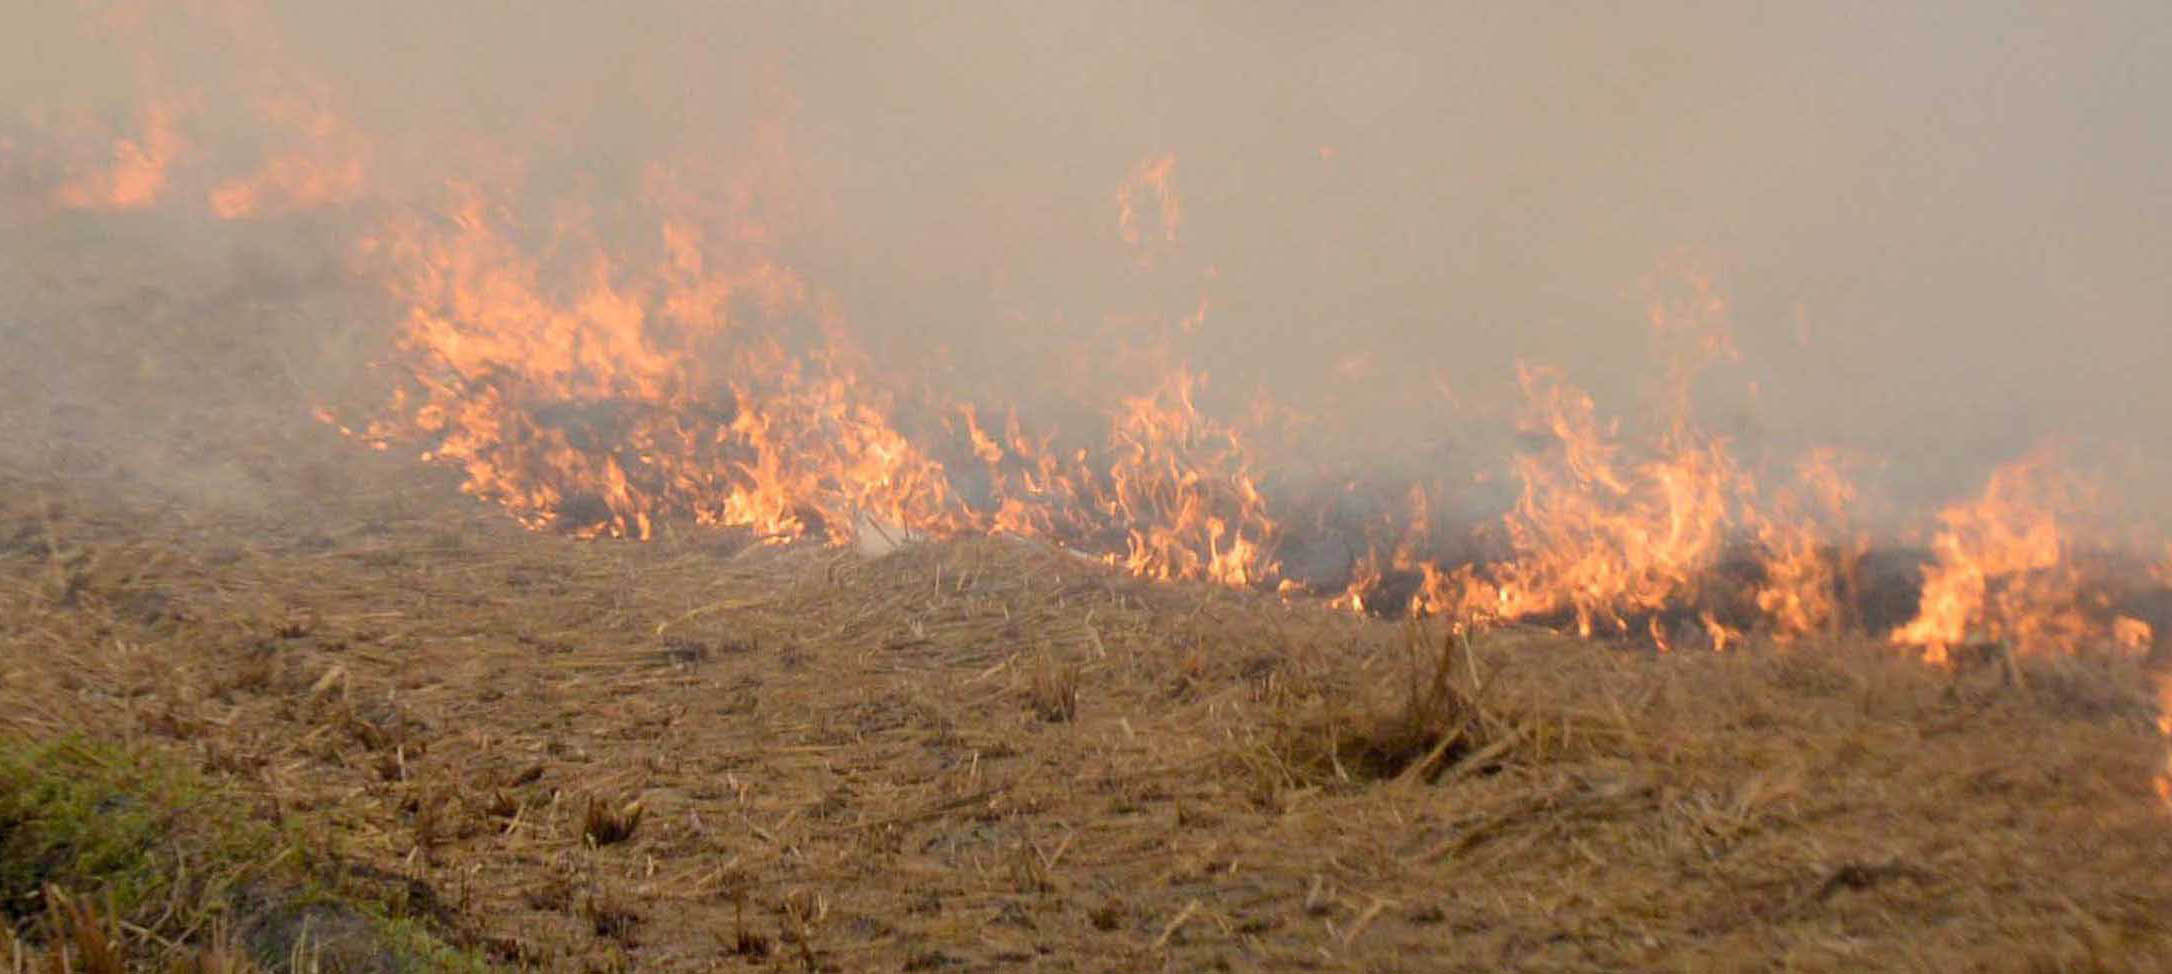 Over 500 farm fires in past 2 days in Punjab